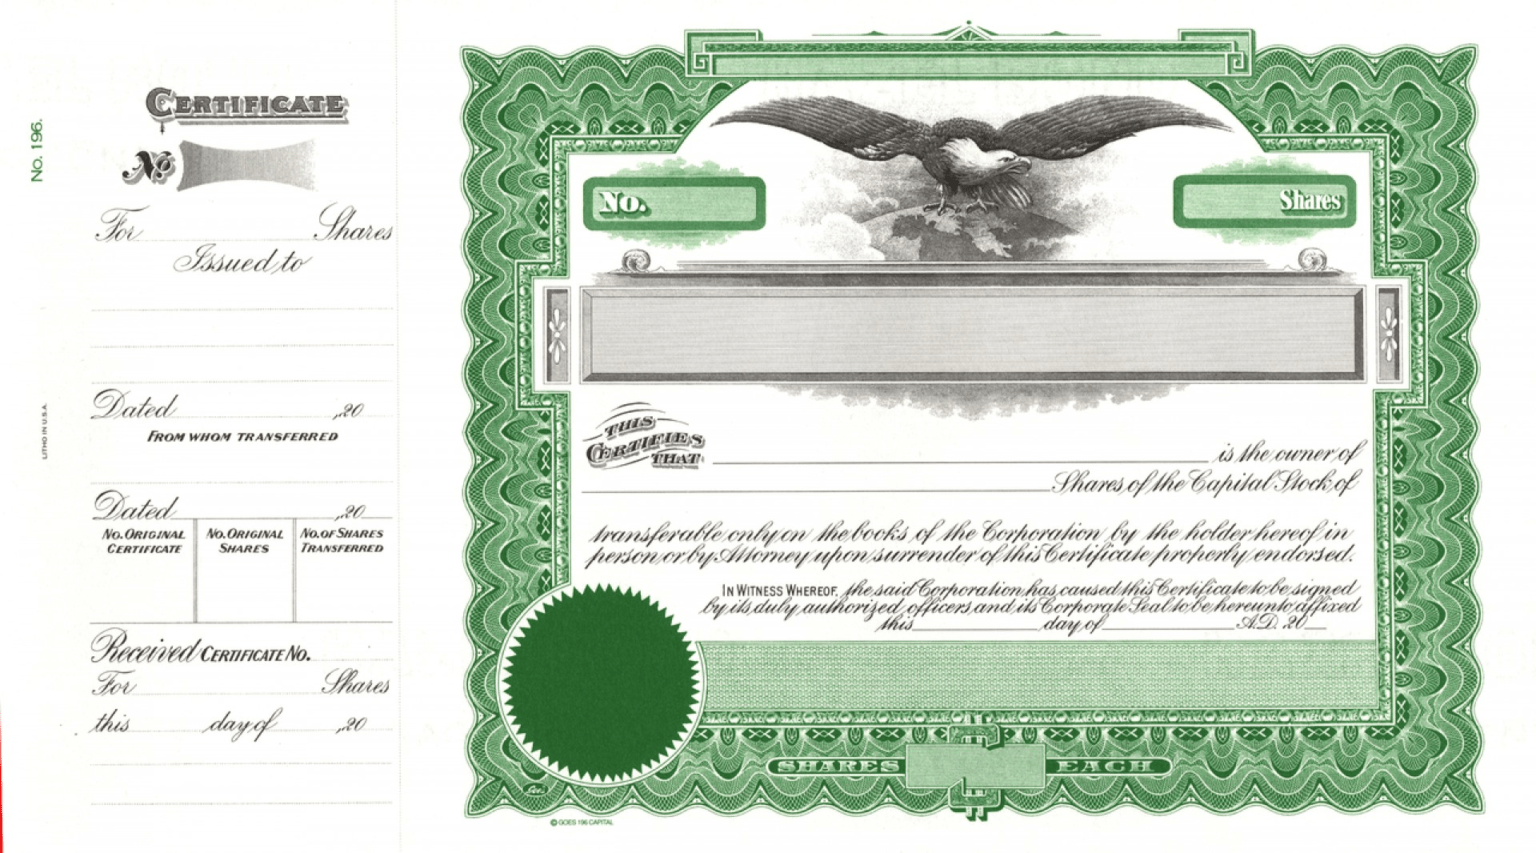 014-free-stock-certificate-template-ideas-microsoft-word-with-regard-to-corporate-share